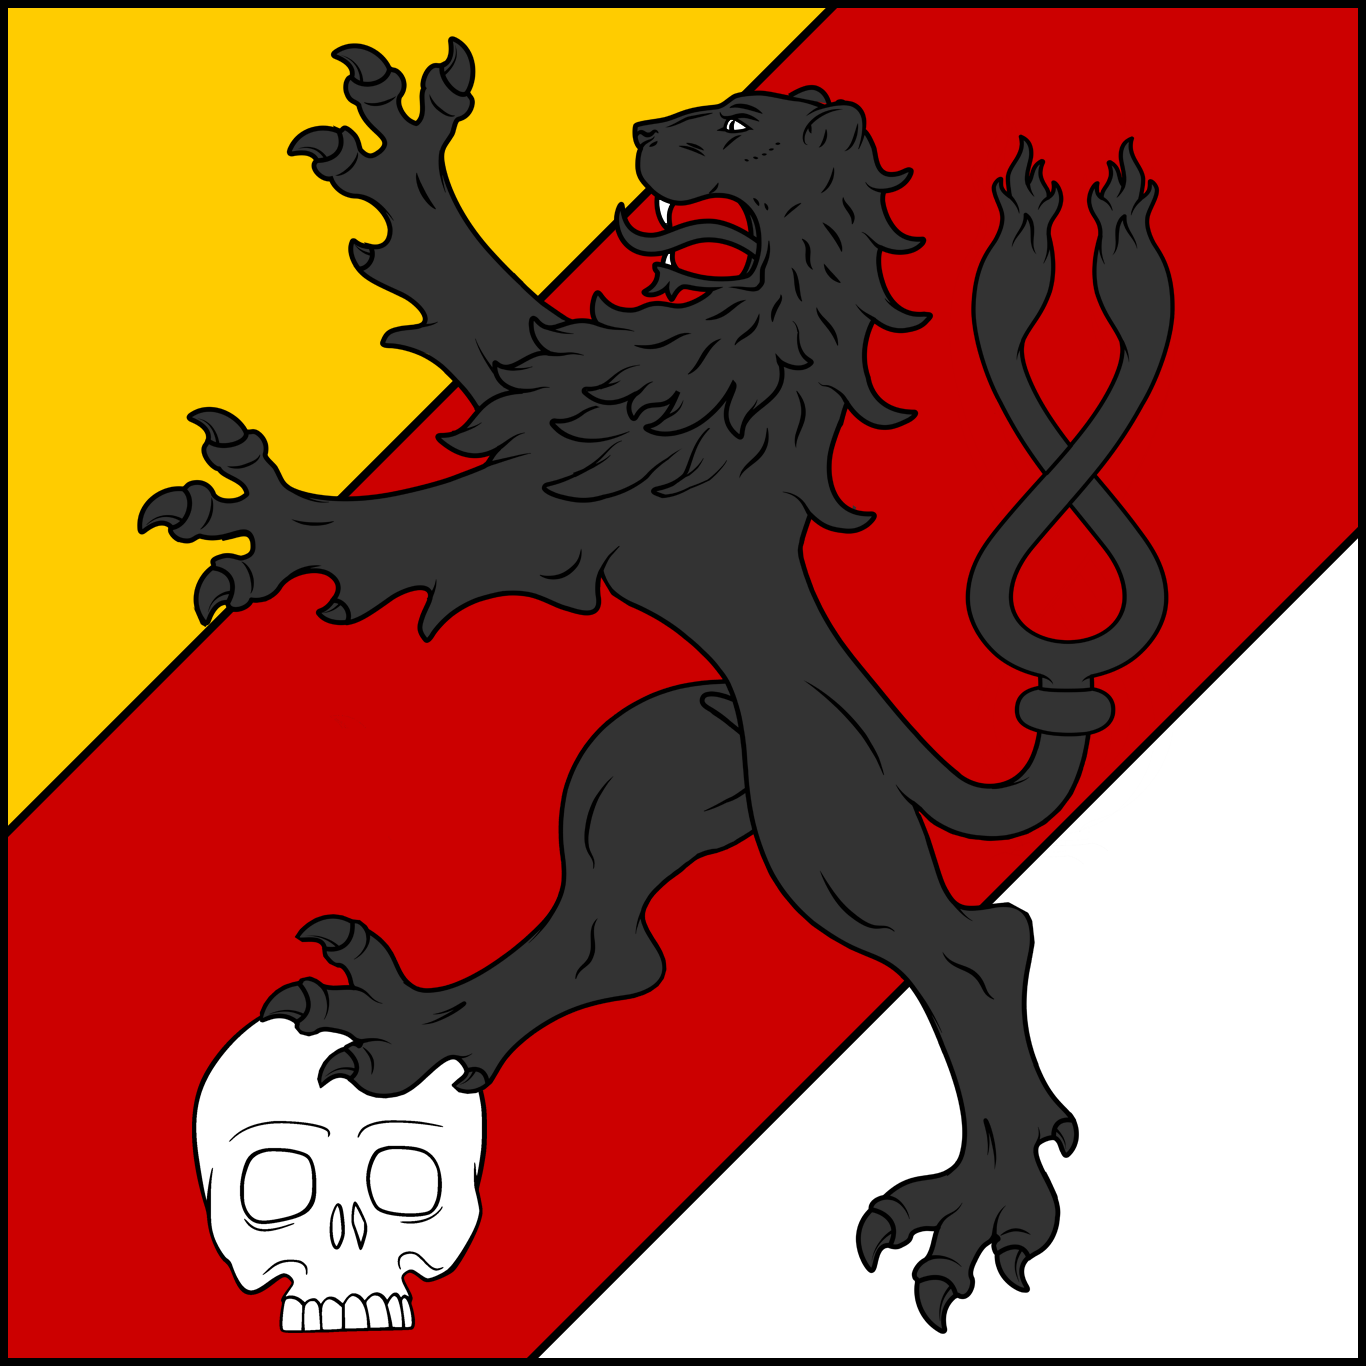 Tierced per bend sinister Or, gules, and argent, a lion rampant queue-fourchee sable, beneath the dexter hind paw a skull argent.